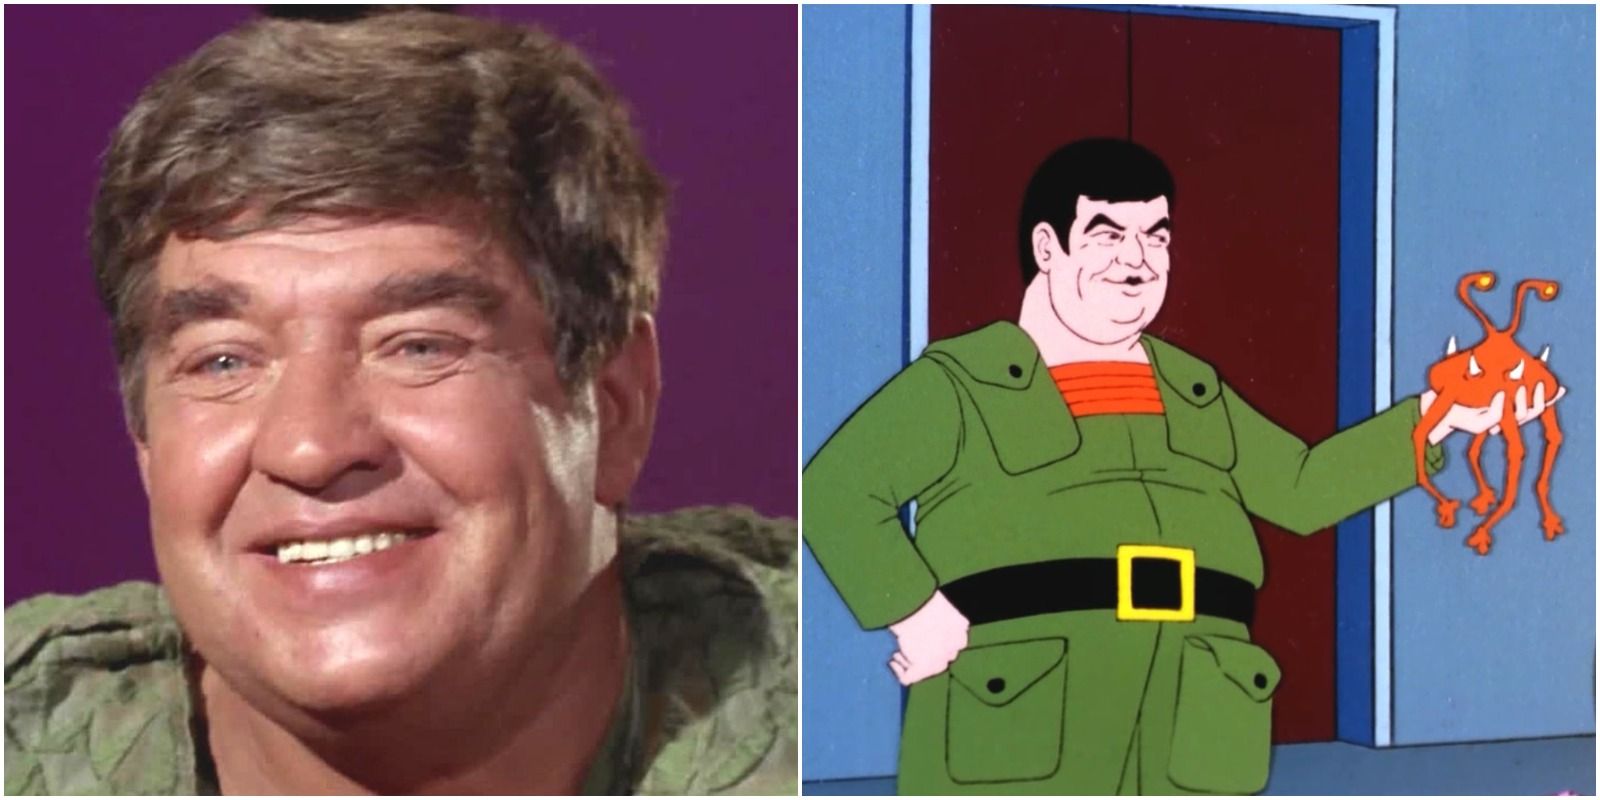 Stanley Adams physically portraying Cyrano Jones and Voicing him in TOS and the animated series